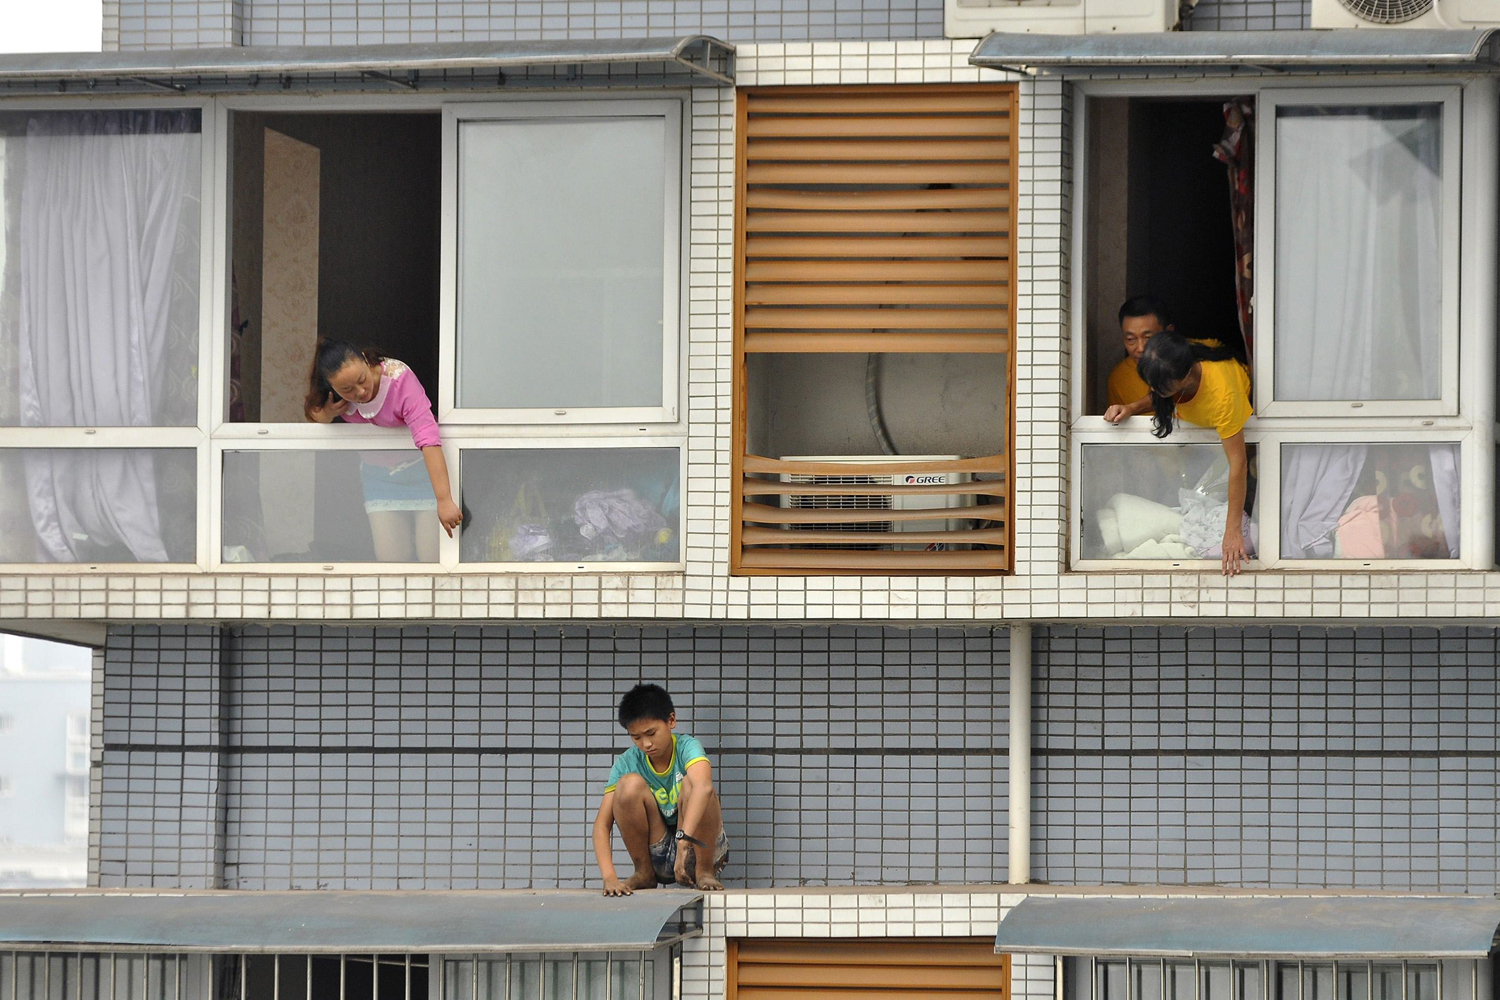 Sept. 8, 2014. A twelve-year-old boy sits outside a window of his eleventh-floor apartment as his relatives try to ask him to come back back inside, in Yibin, Sichuan province. The boy was afraid of being punished by his mother for not finishing his homework on time. After two hours' standoff, he was persuaded by police and family members to come inside.